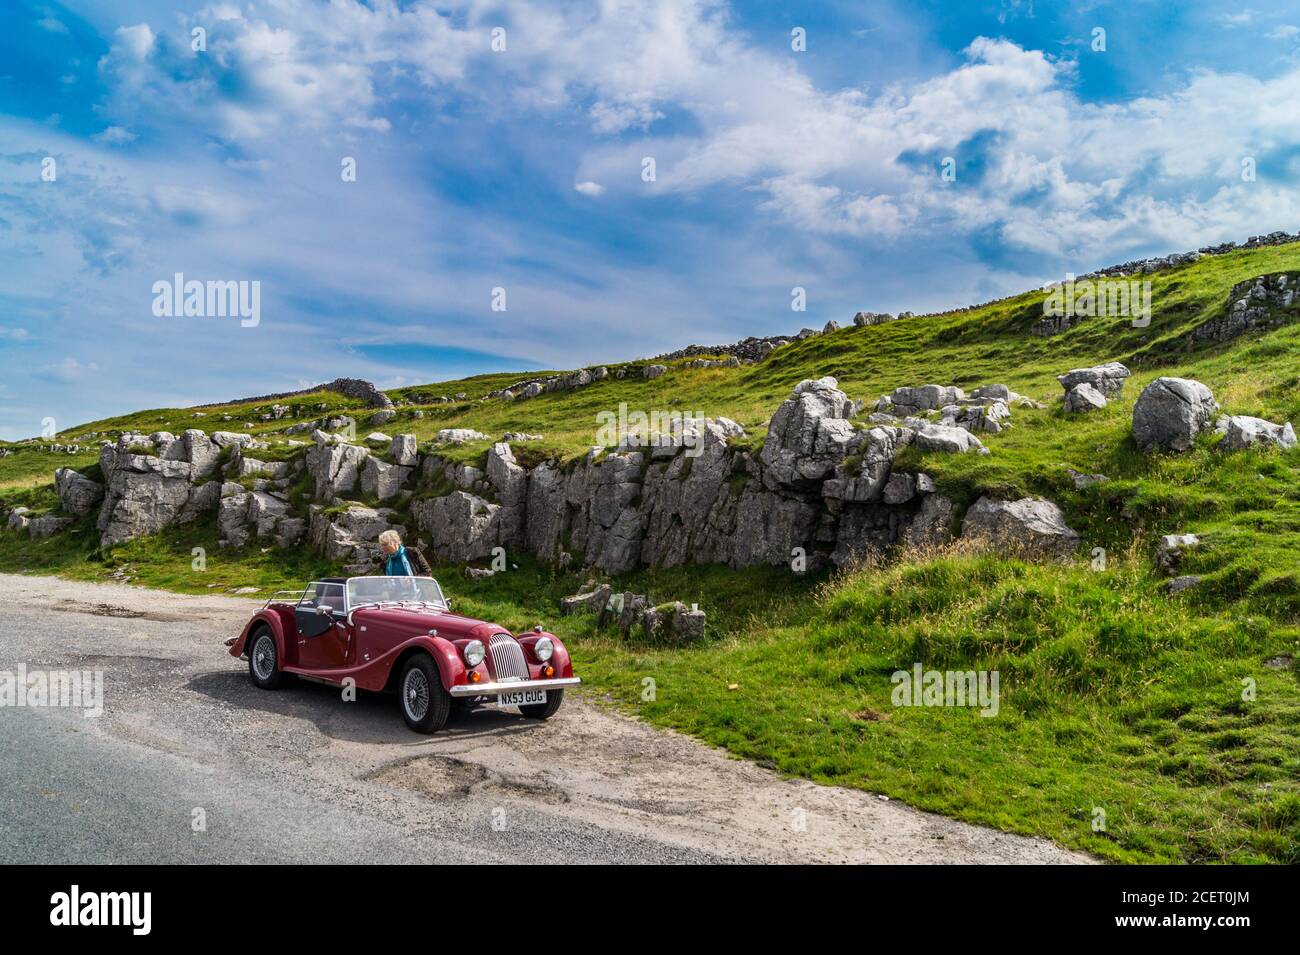 2003 model Morgan 4/4 drop-head coupé sports car, Winskill Stones, Stainforth, North Yorkshire, England Stock Photo